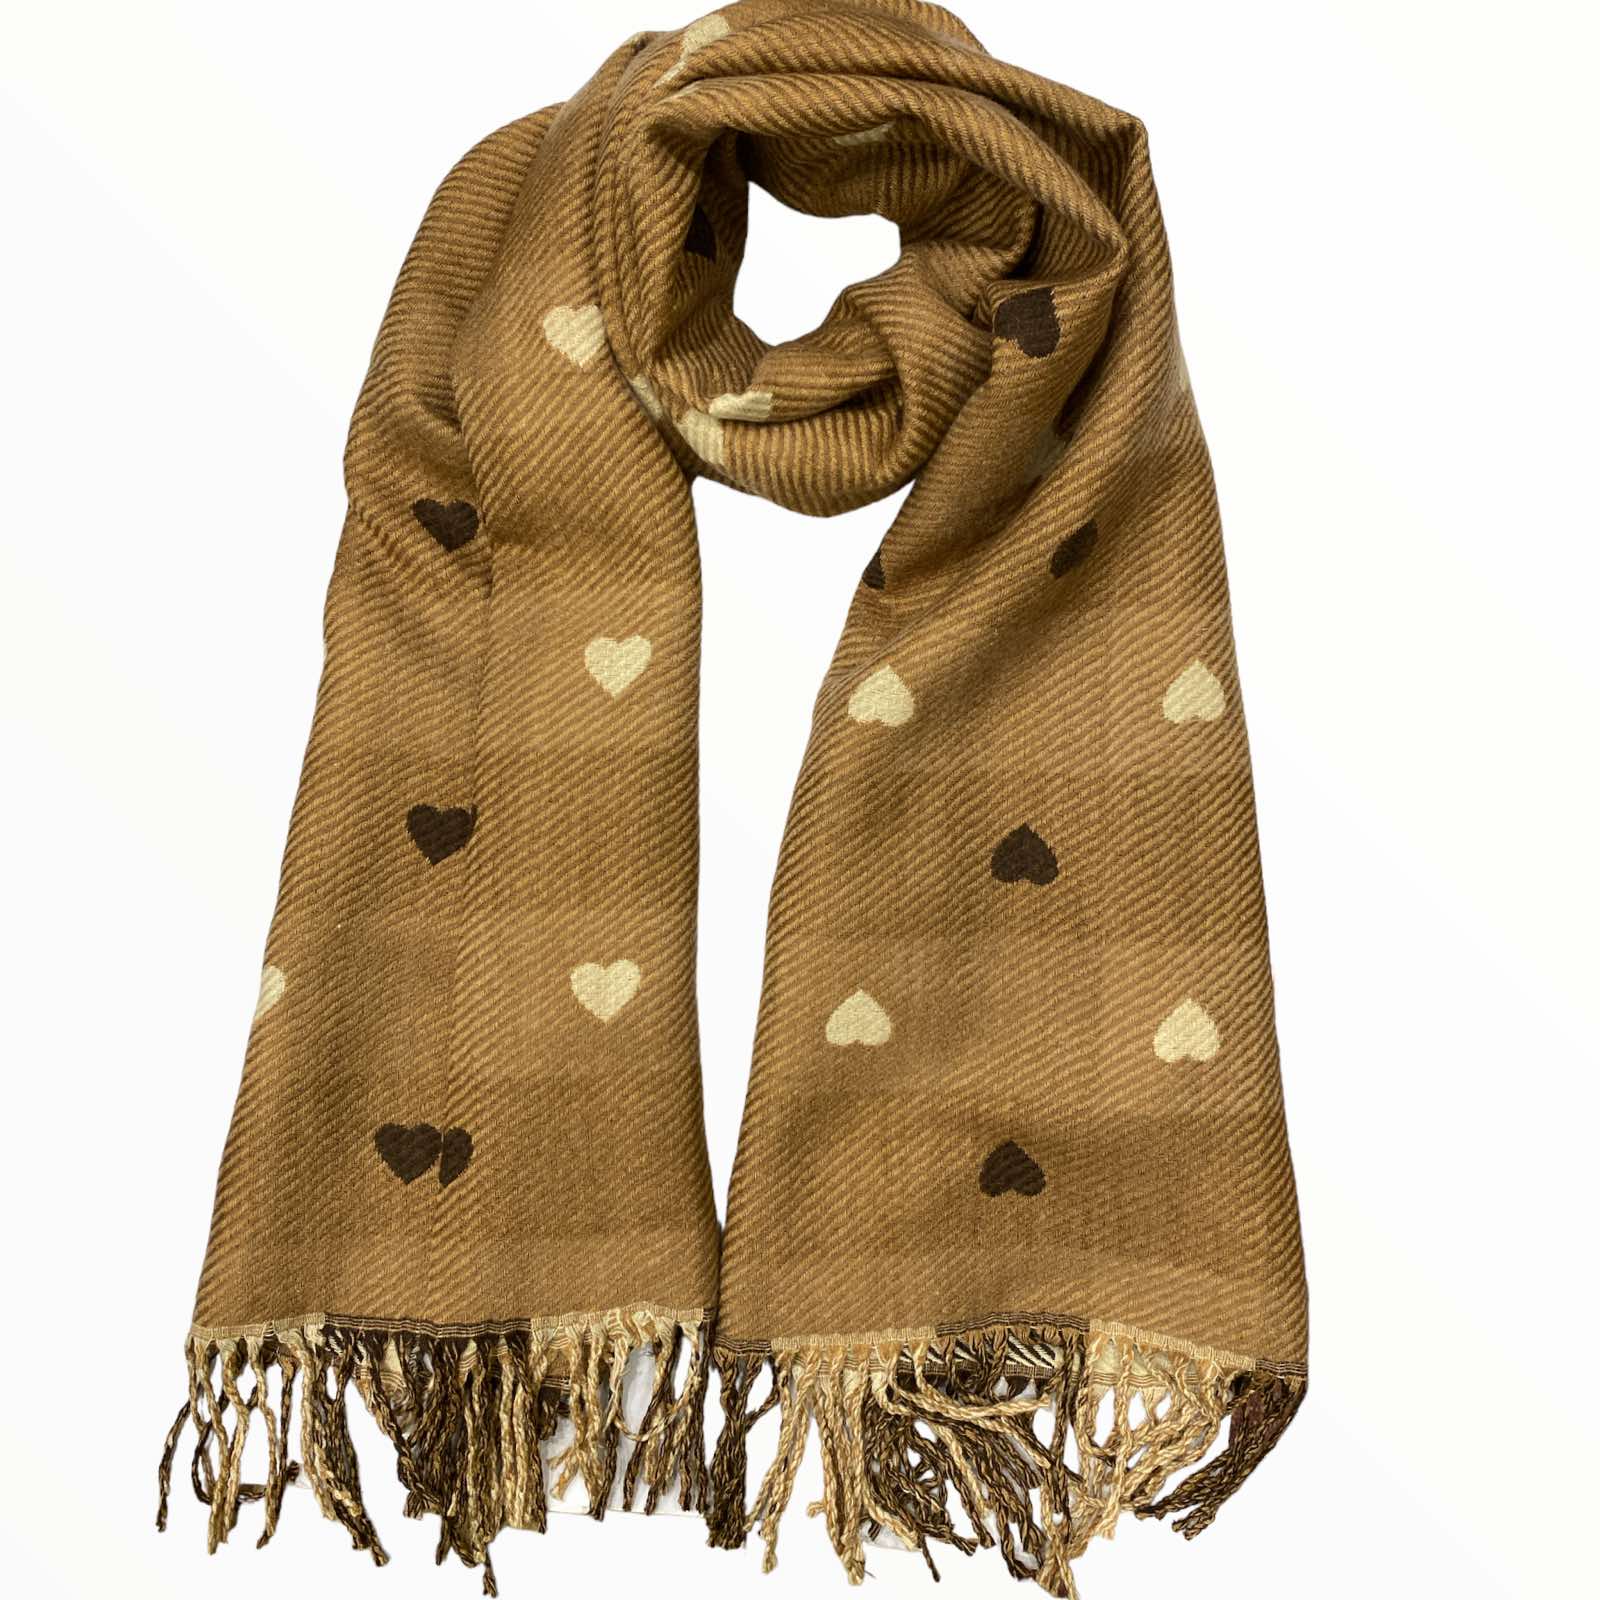 Brown and beige double face soft scarf